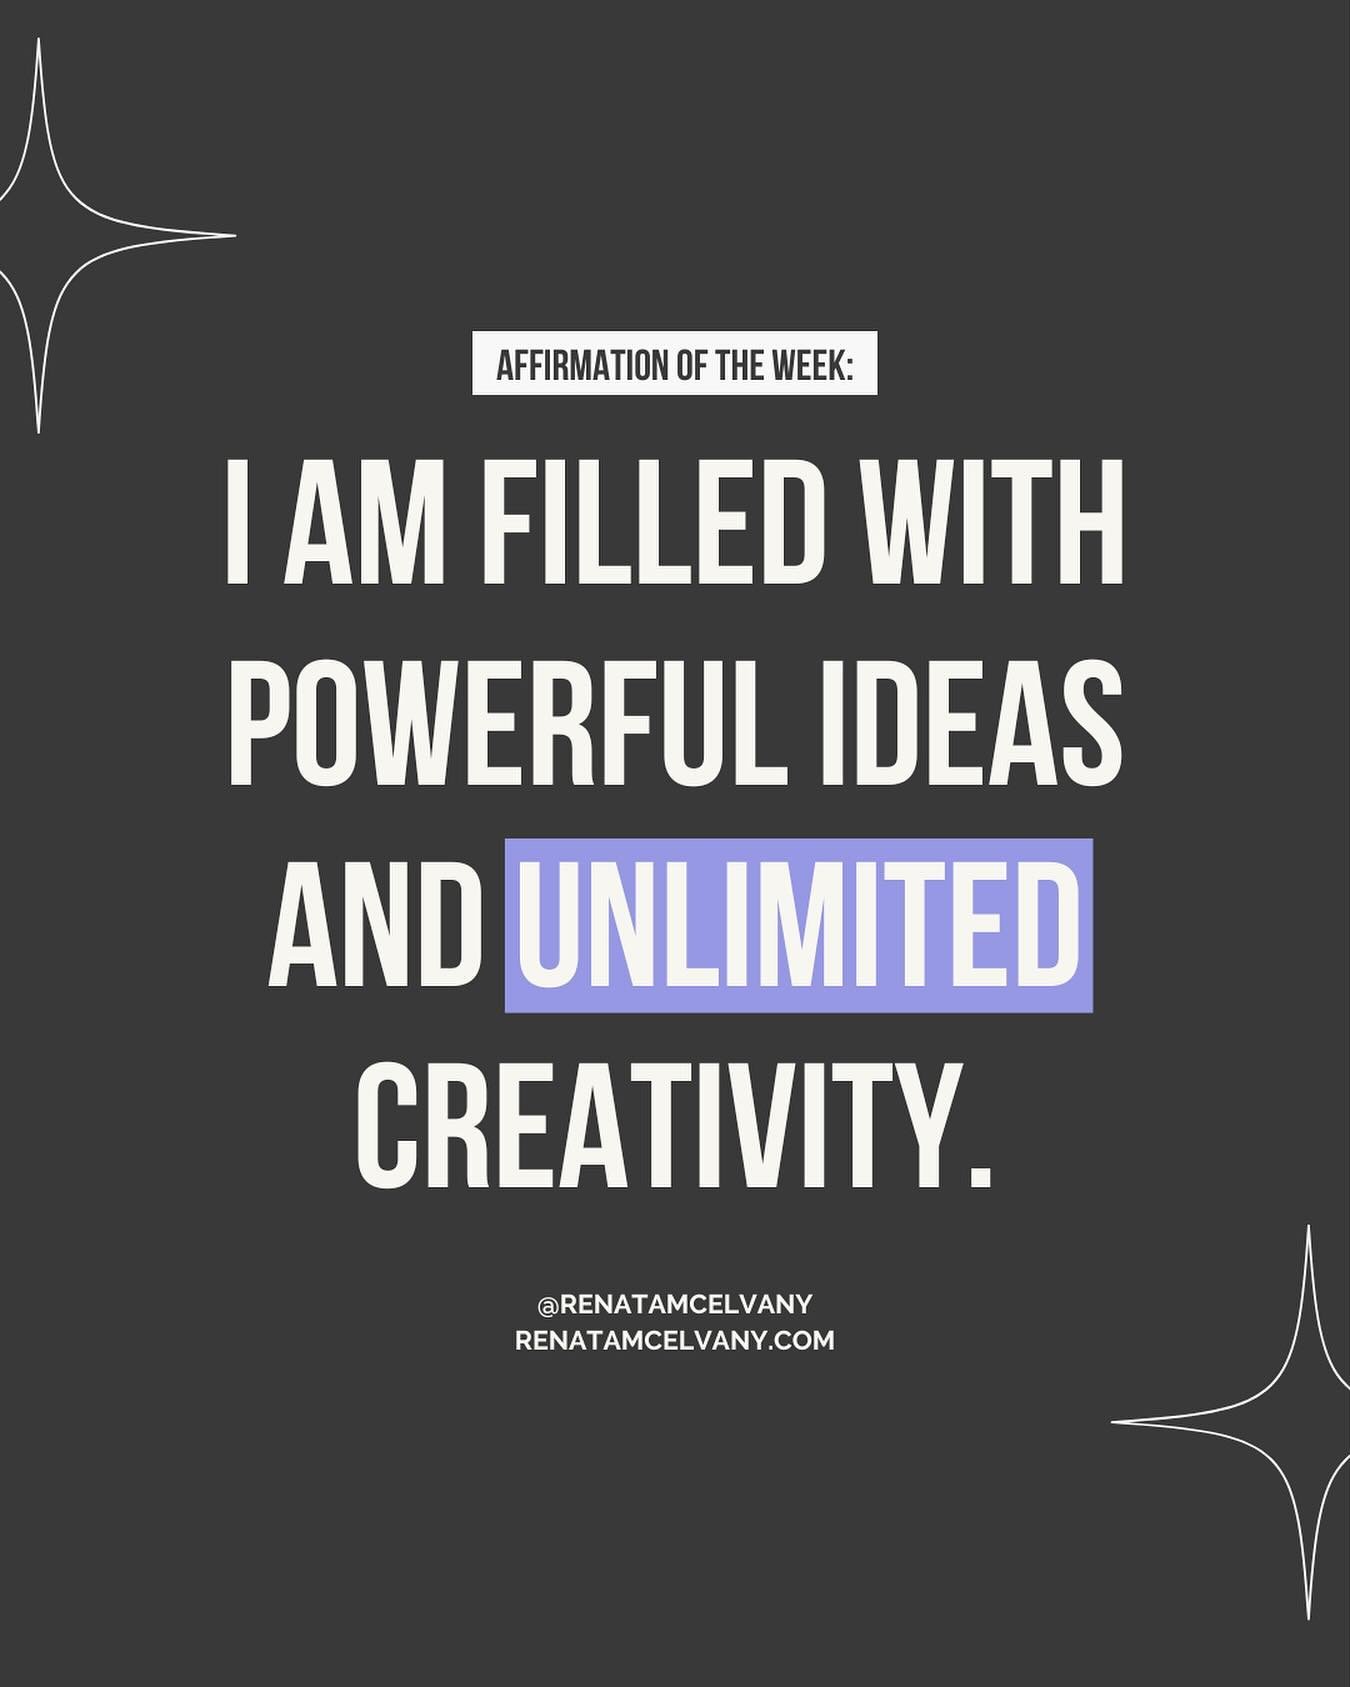 Creatives! Here is your weekly affirmation:

I am filled with powerful ideas and unlimited creativity ✨

Wishing you a week filled with creation 💜

#creativitycoach #creativementor&nbsp; #artistssupport #woccreatives #createthelifeyouwant #arttips #